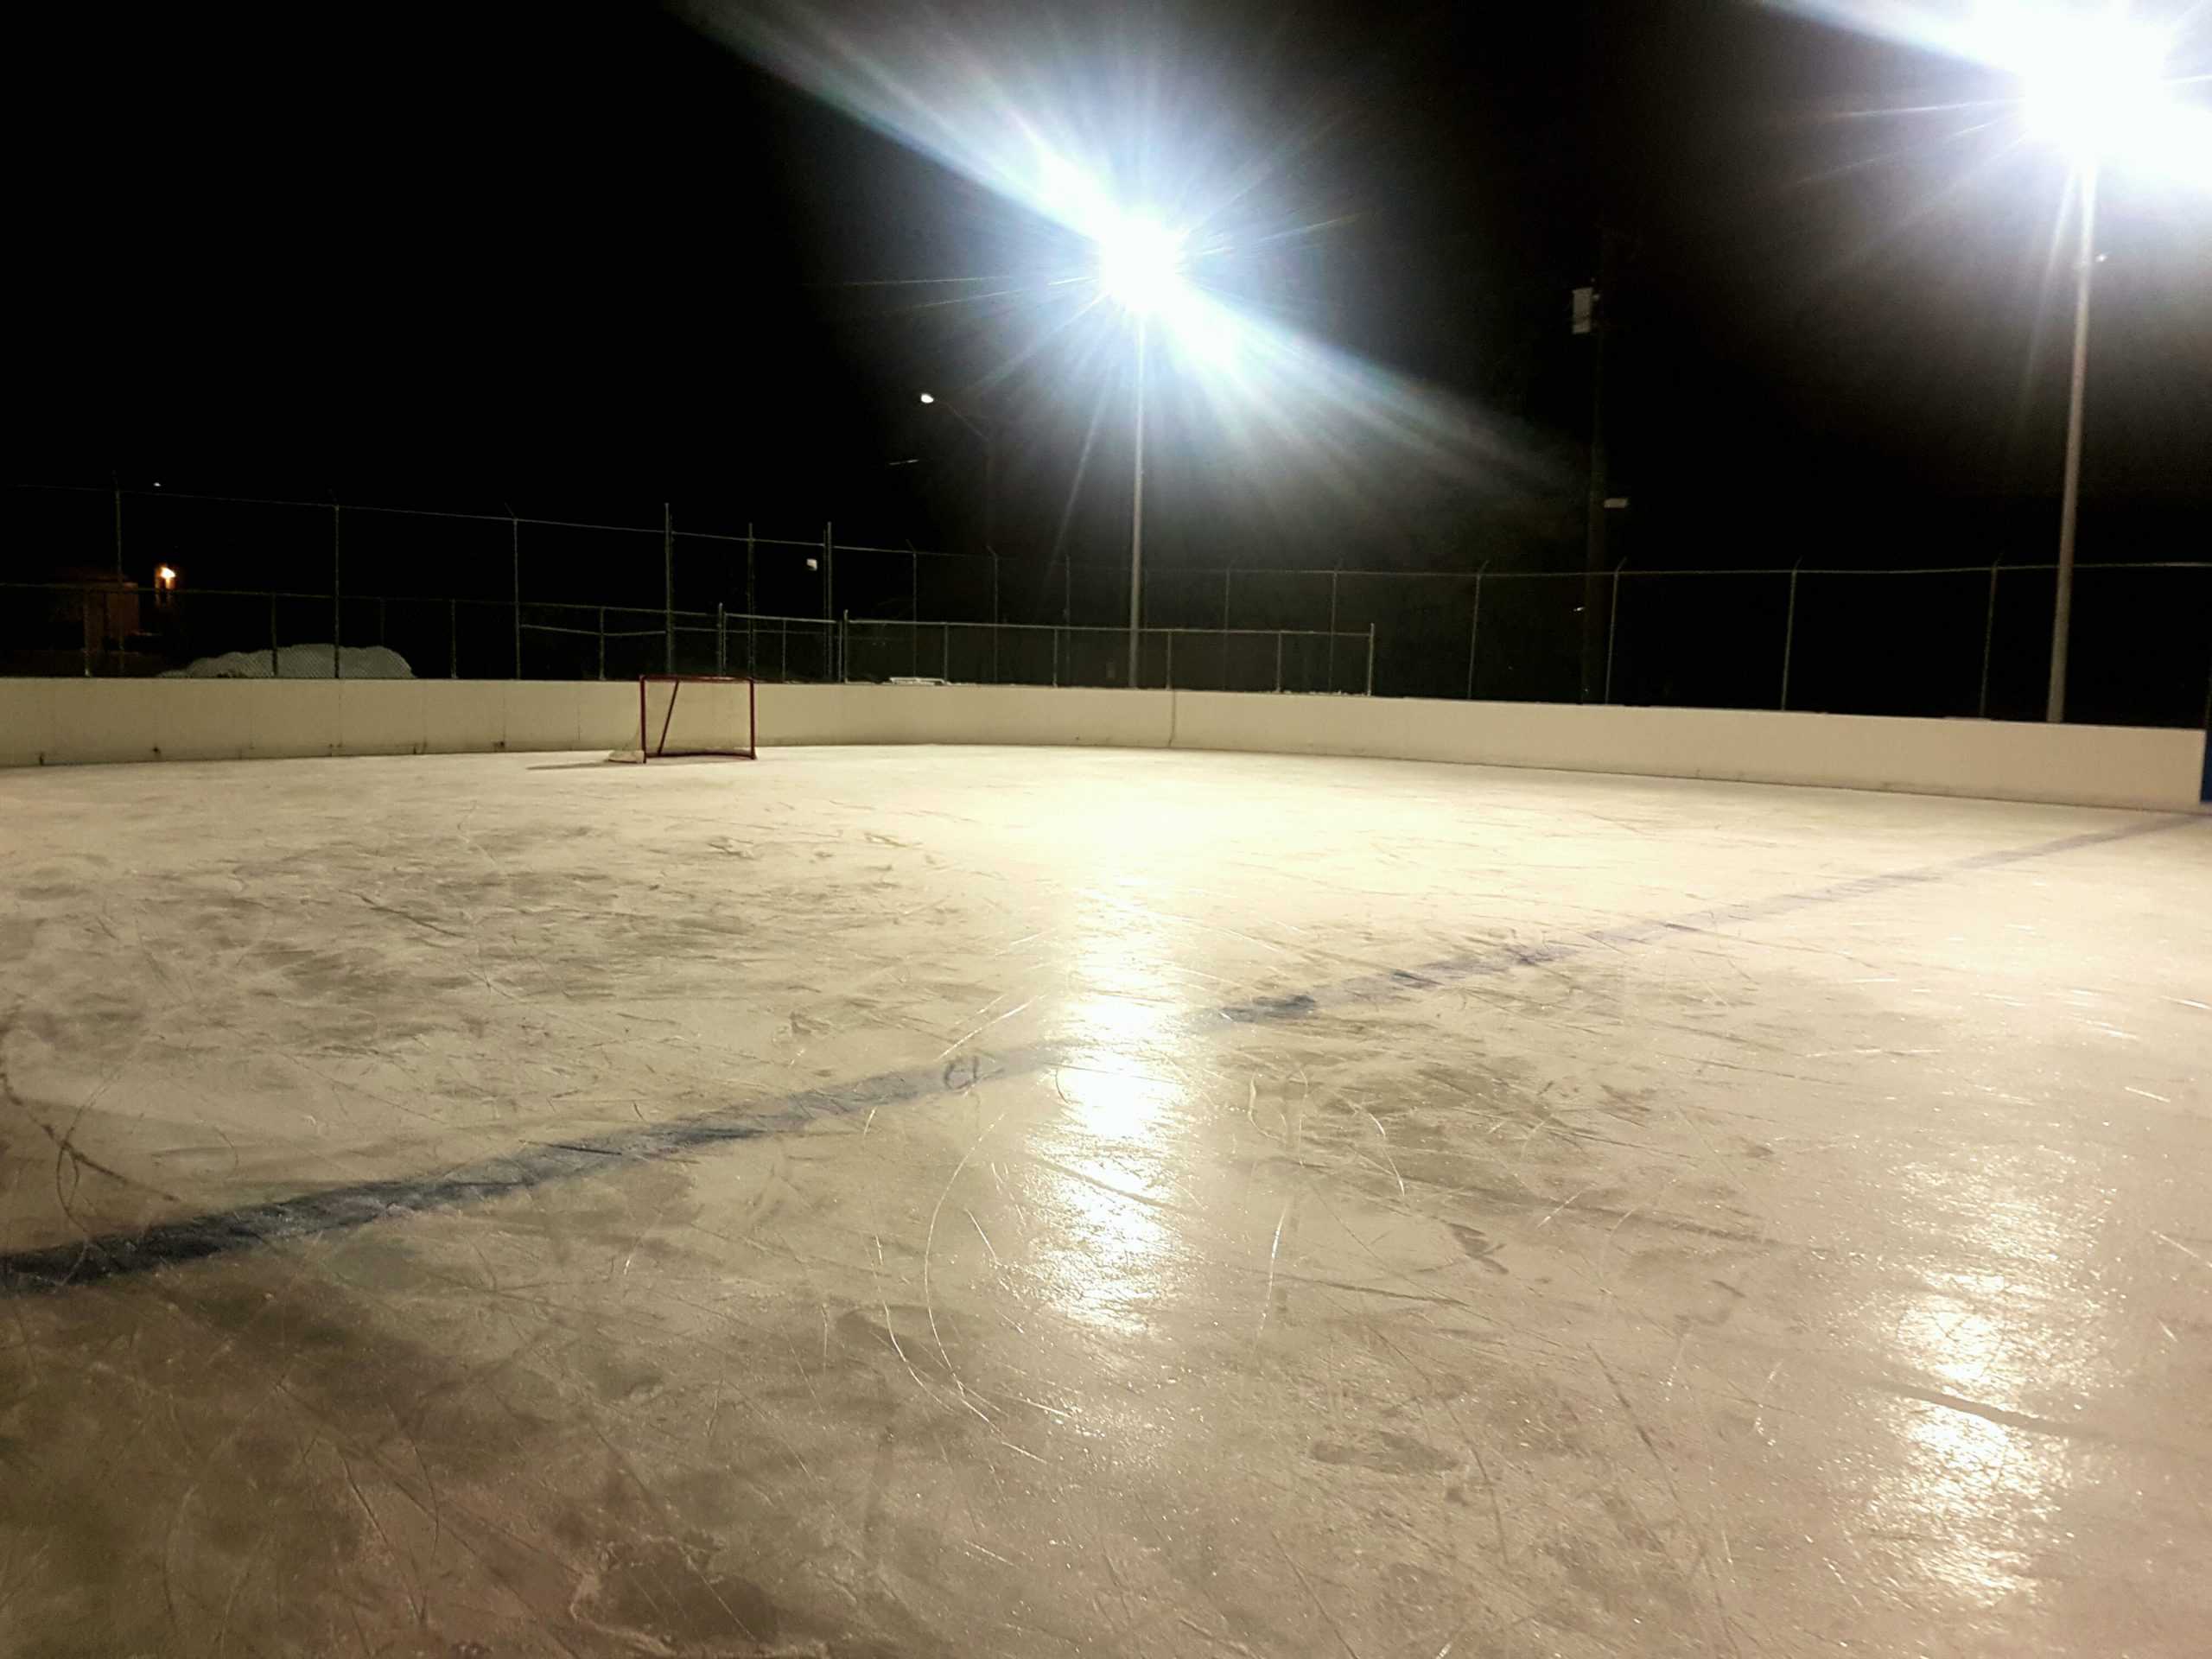 The beauty of community rinks at night